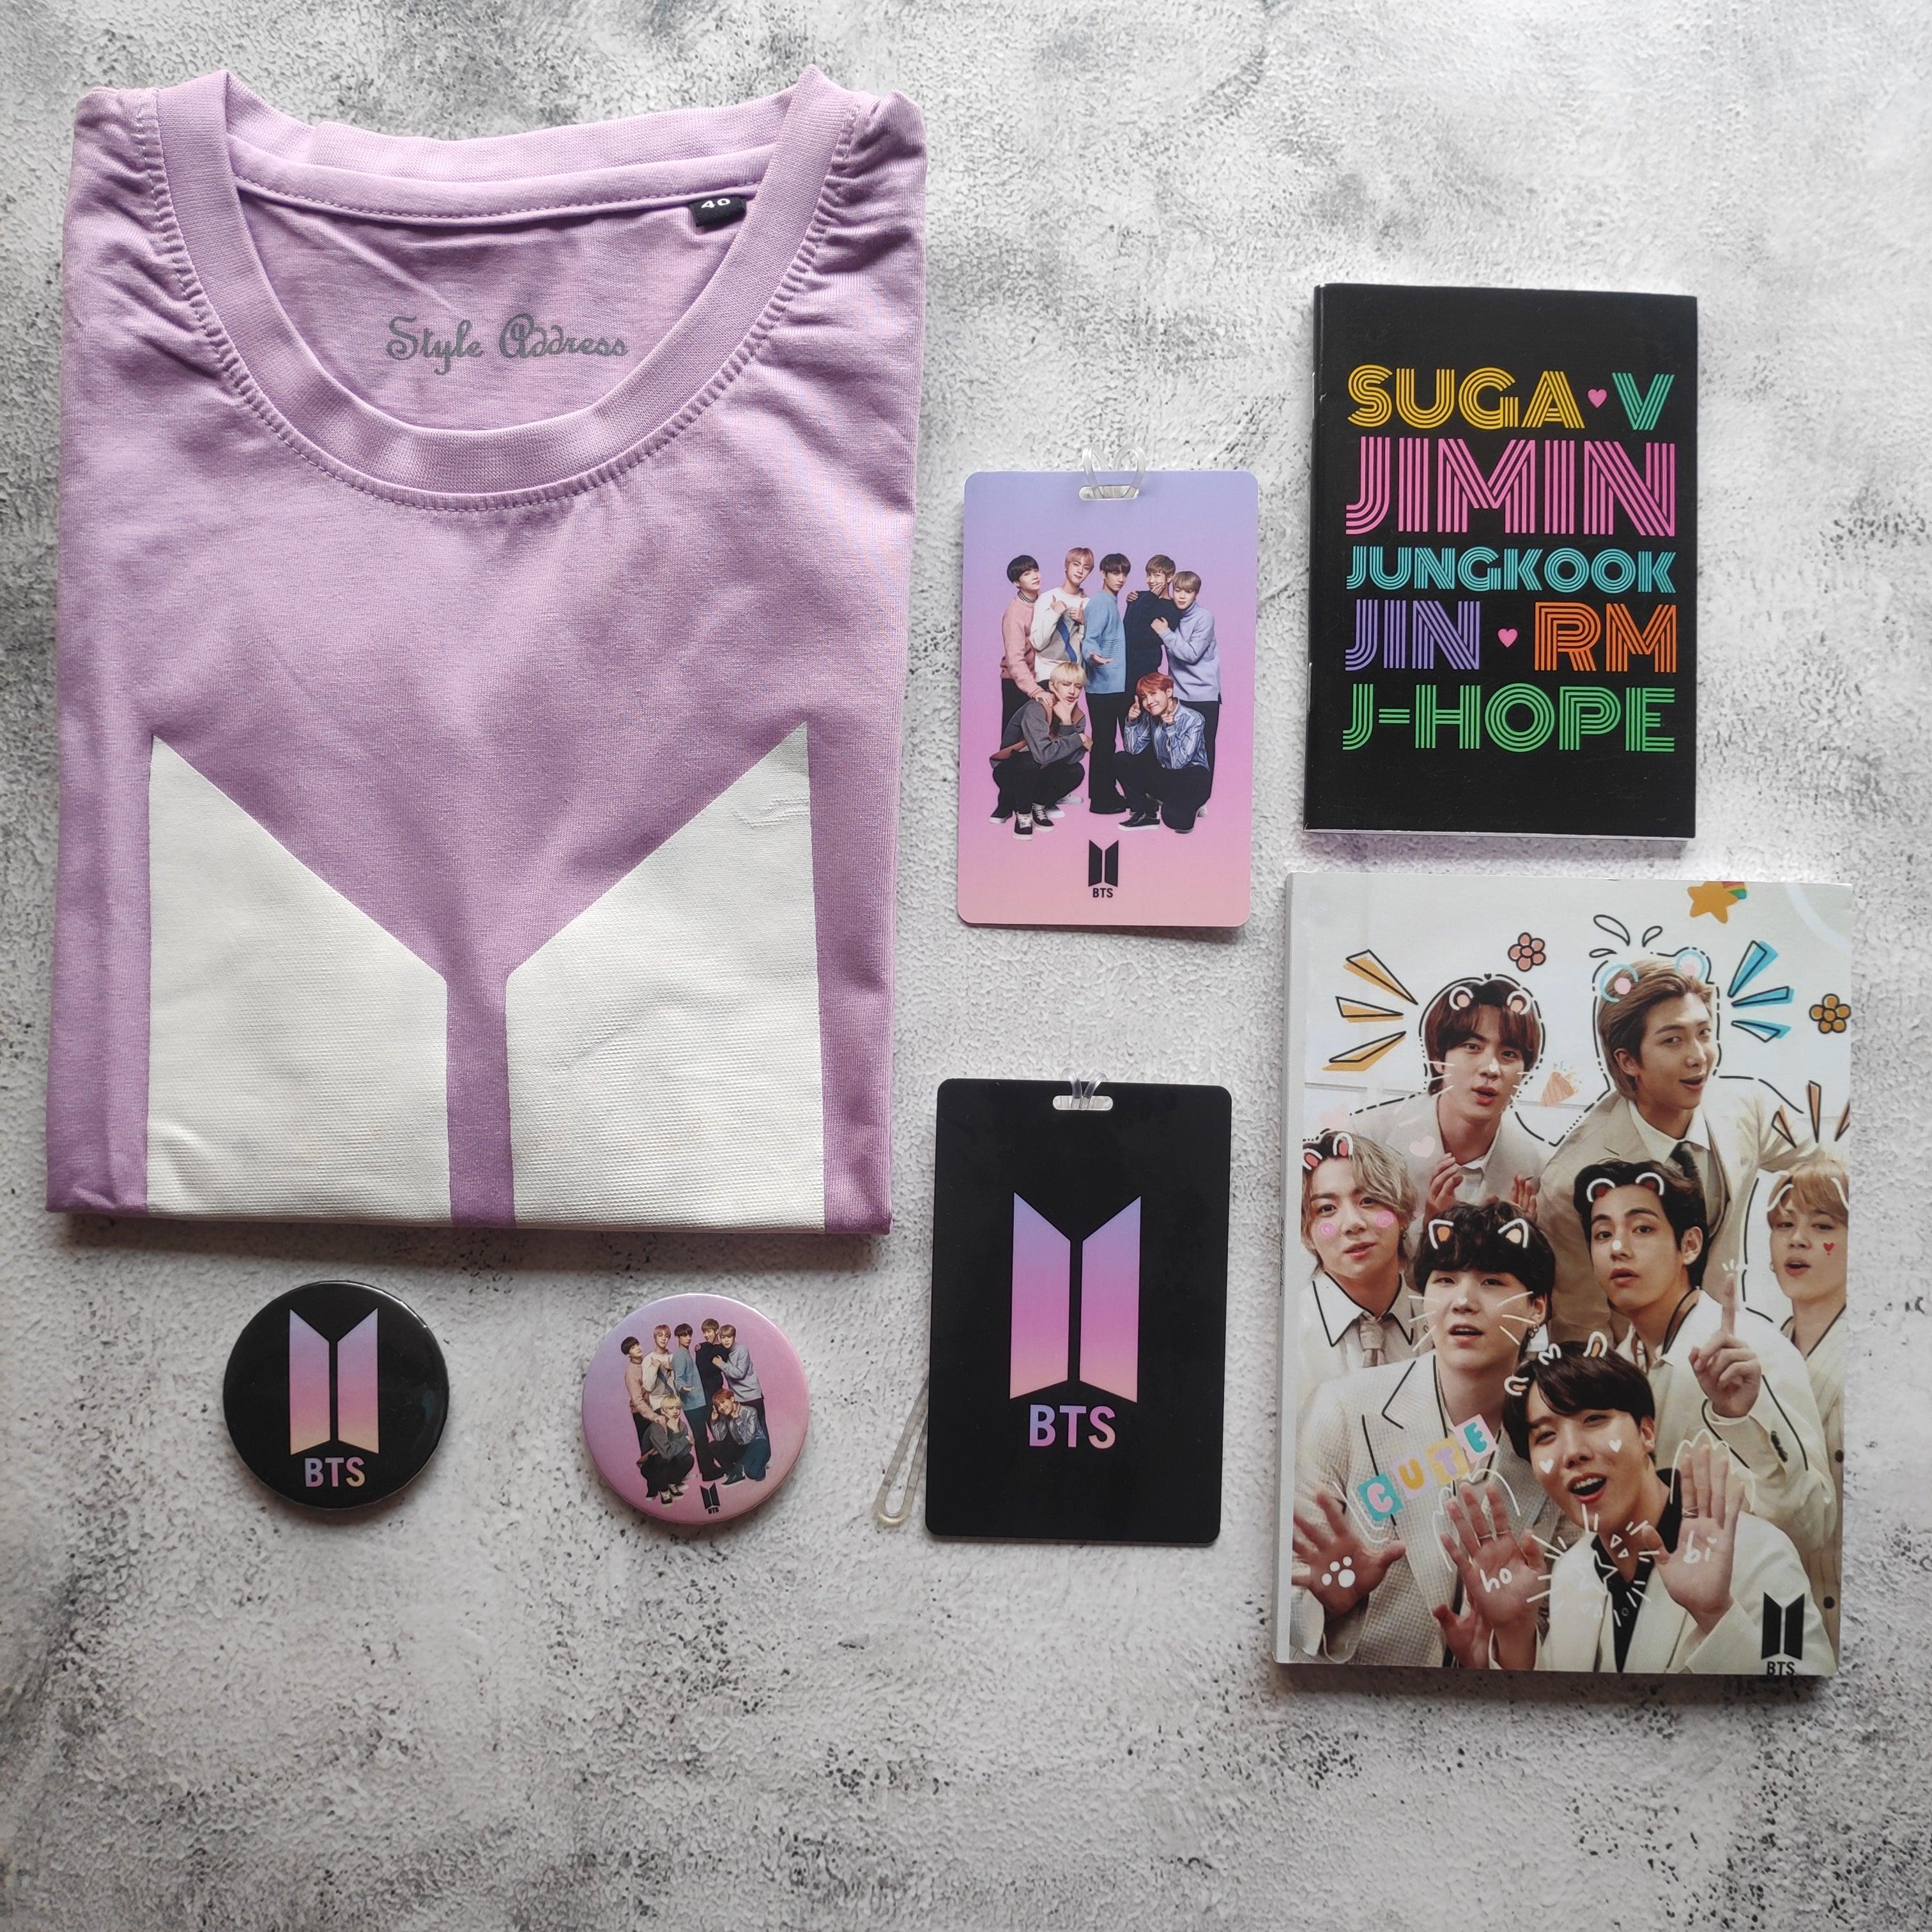 Discover more than 216 bts related gifts